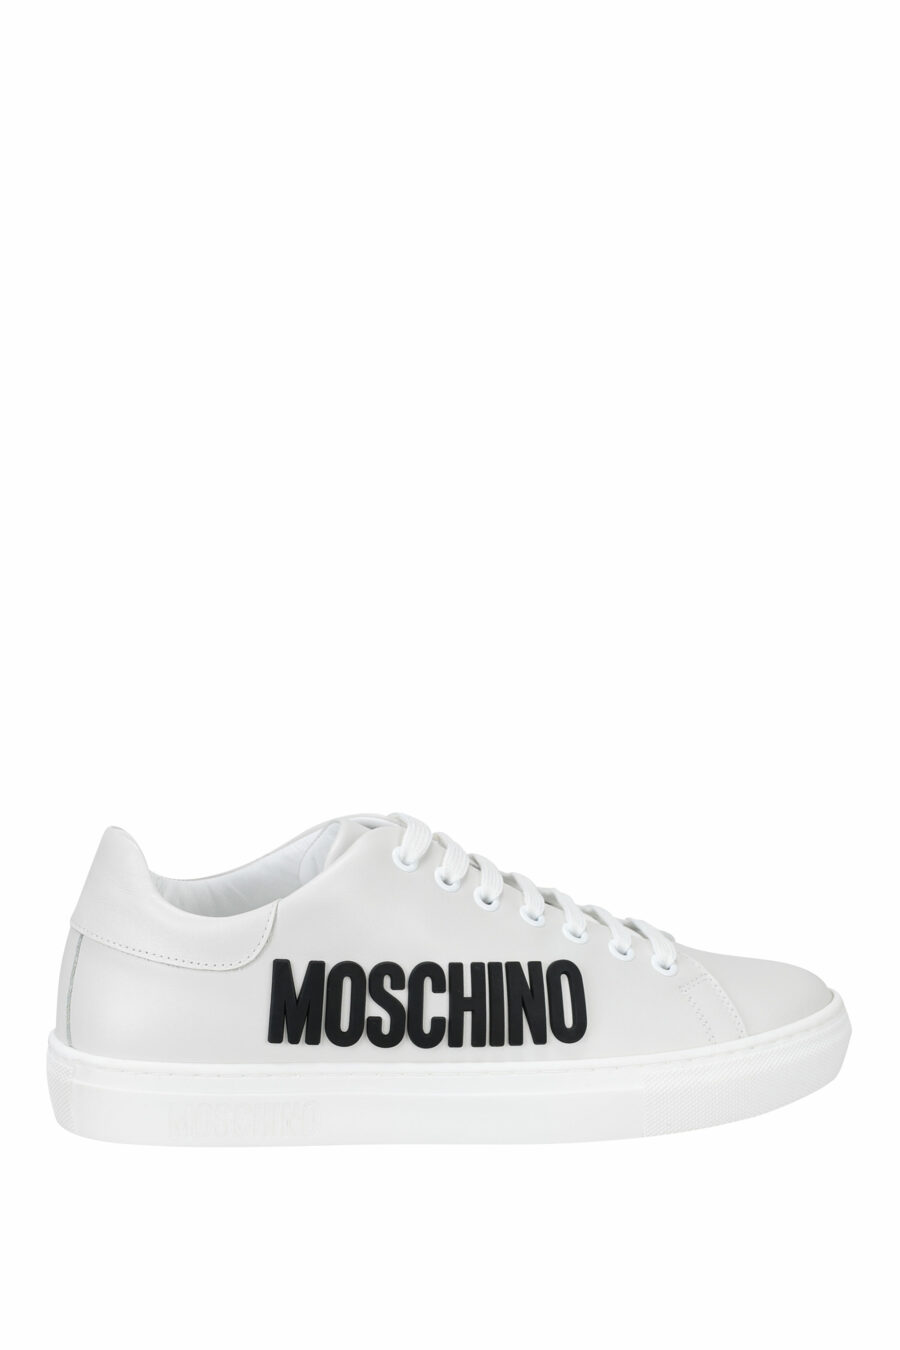 White trainers with black "lettering" logo - 8054653099241